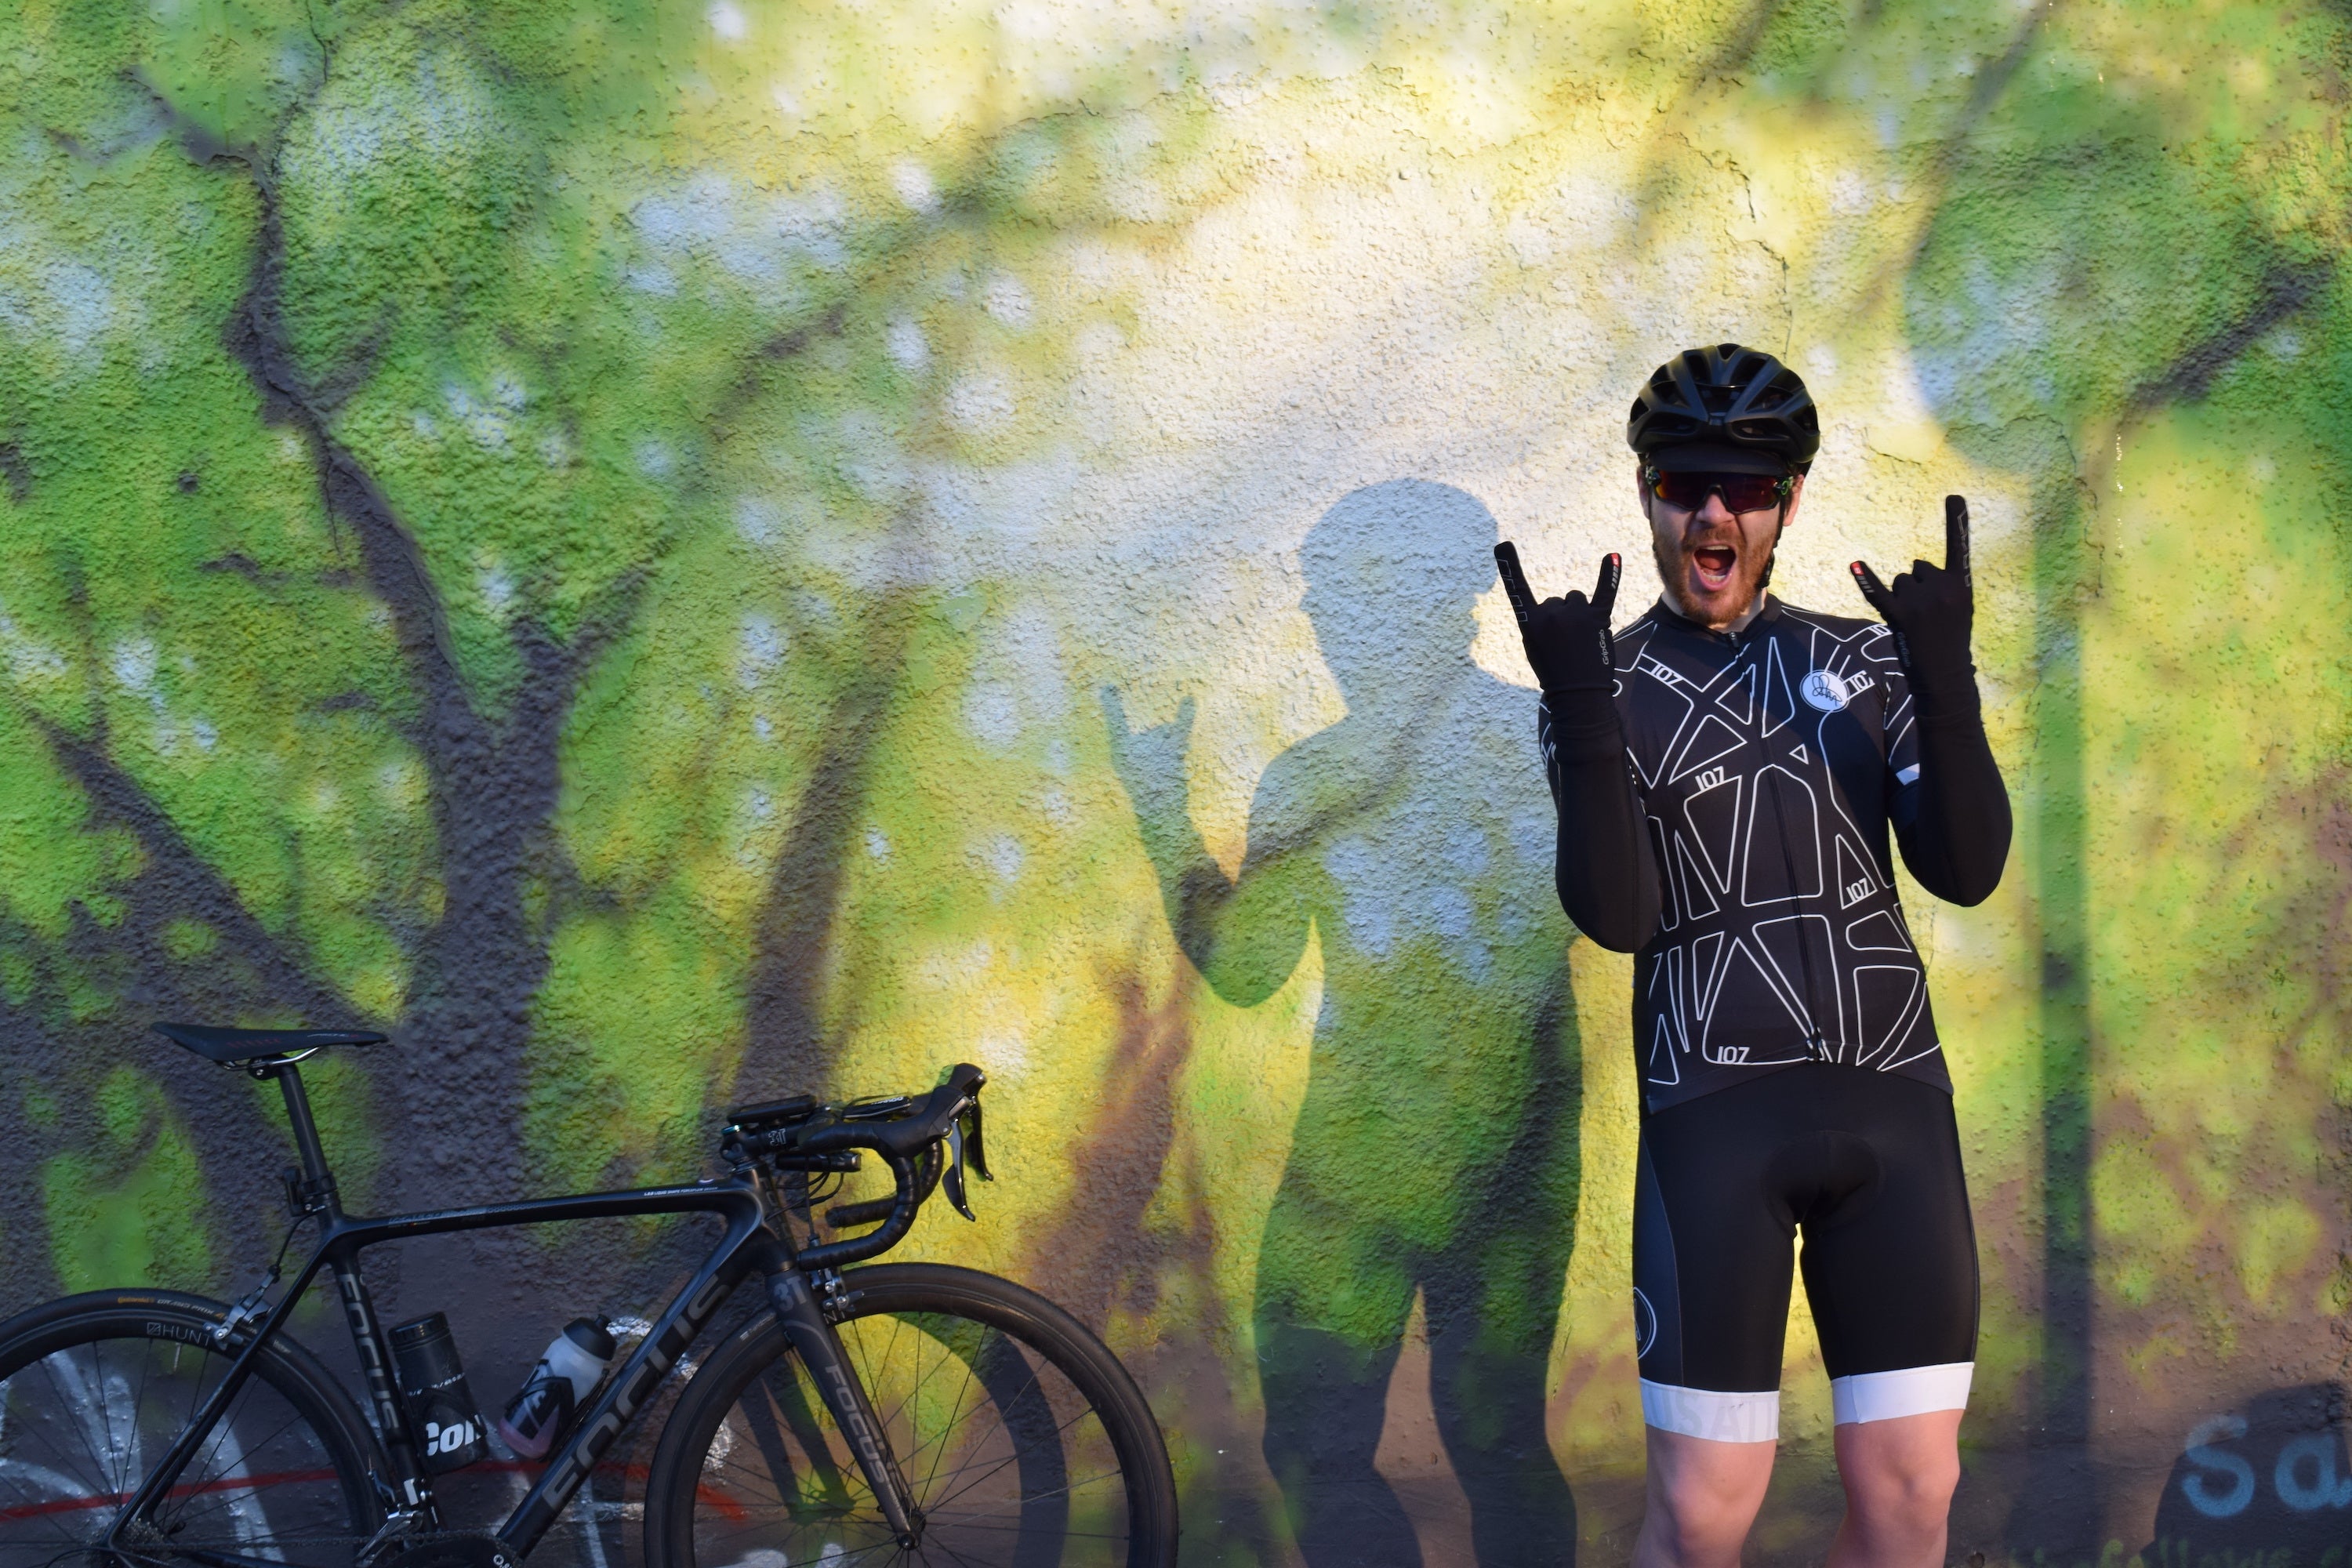 Cycling Chris Hall takes on 107 for 107 challenge in special edition jersey and bib shorts